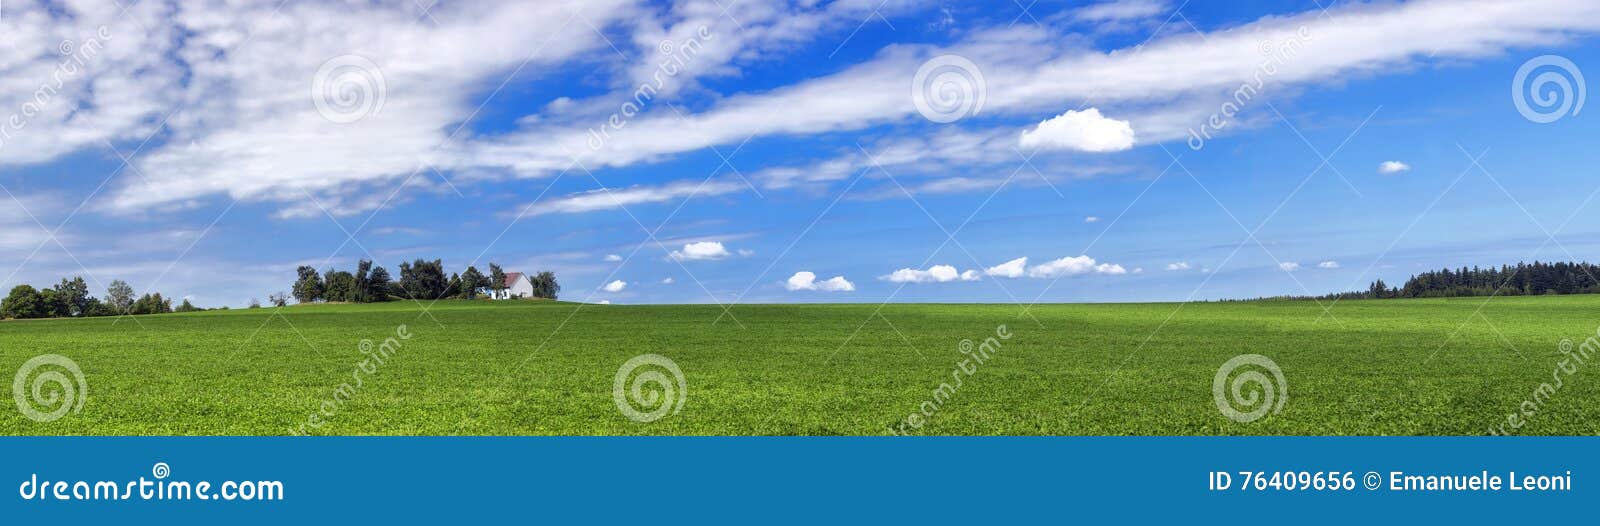 amazing summer countryside with green pasture and blue sky with clouds - czech republic, europe.